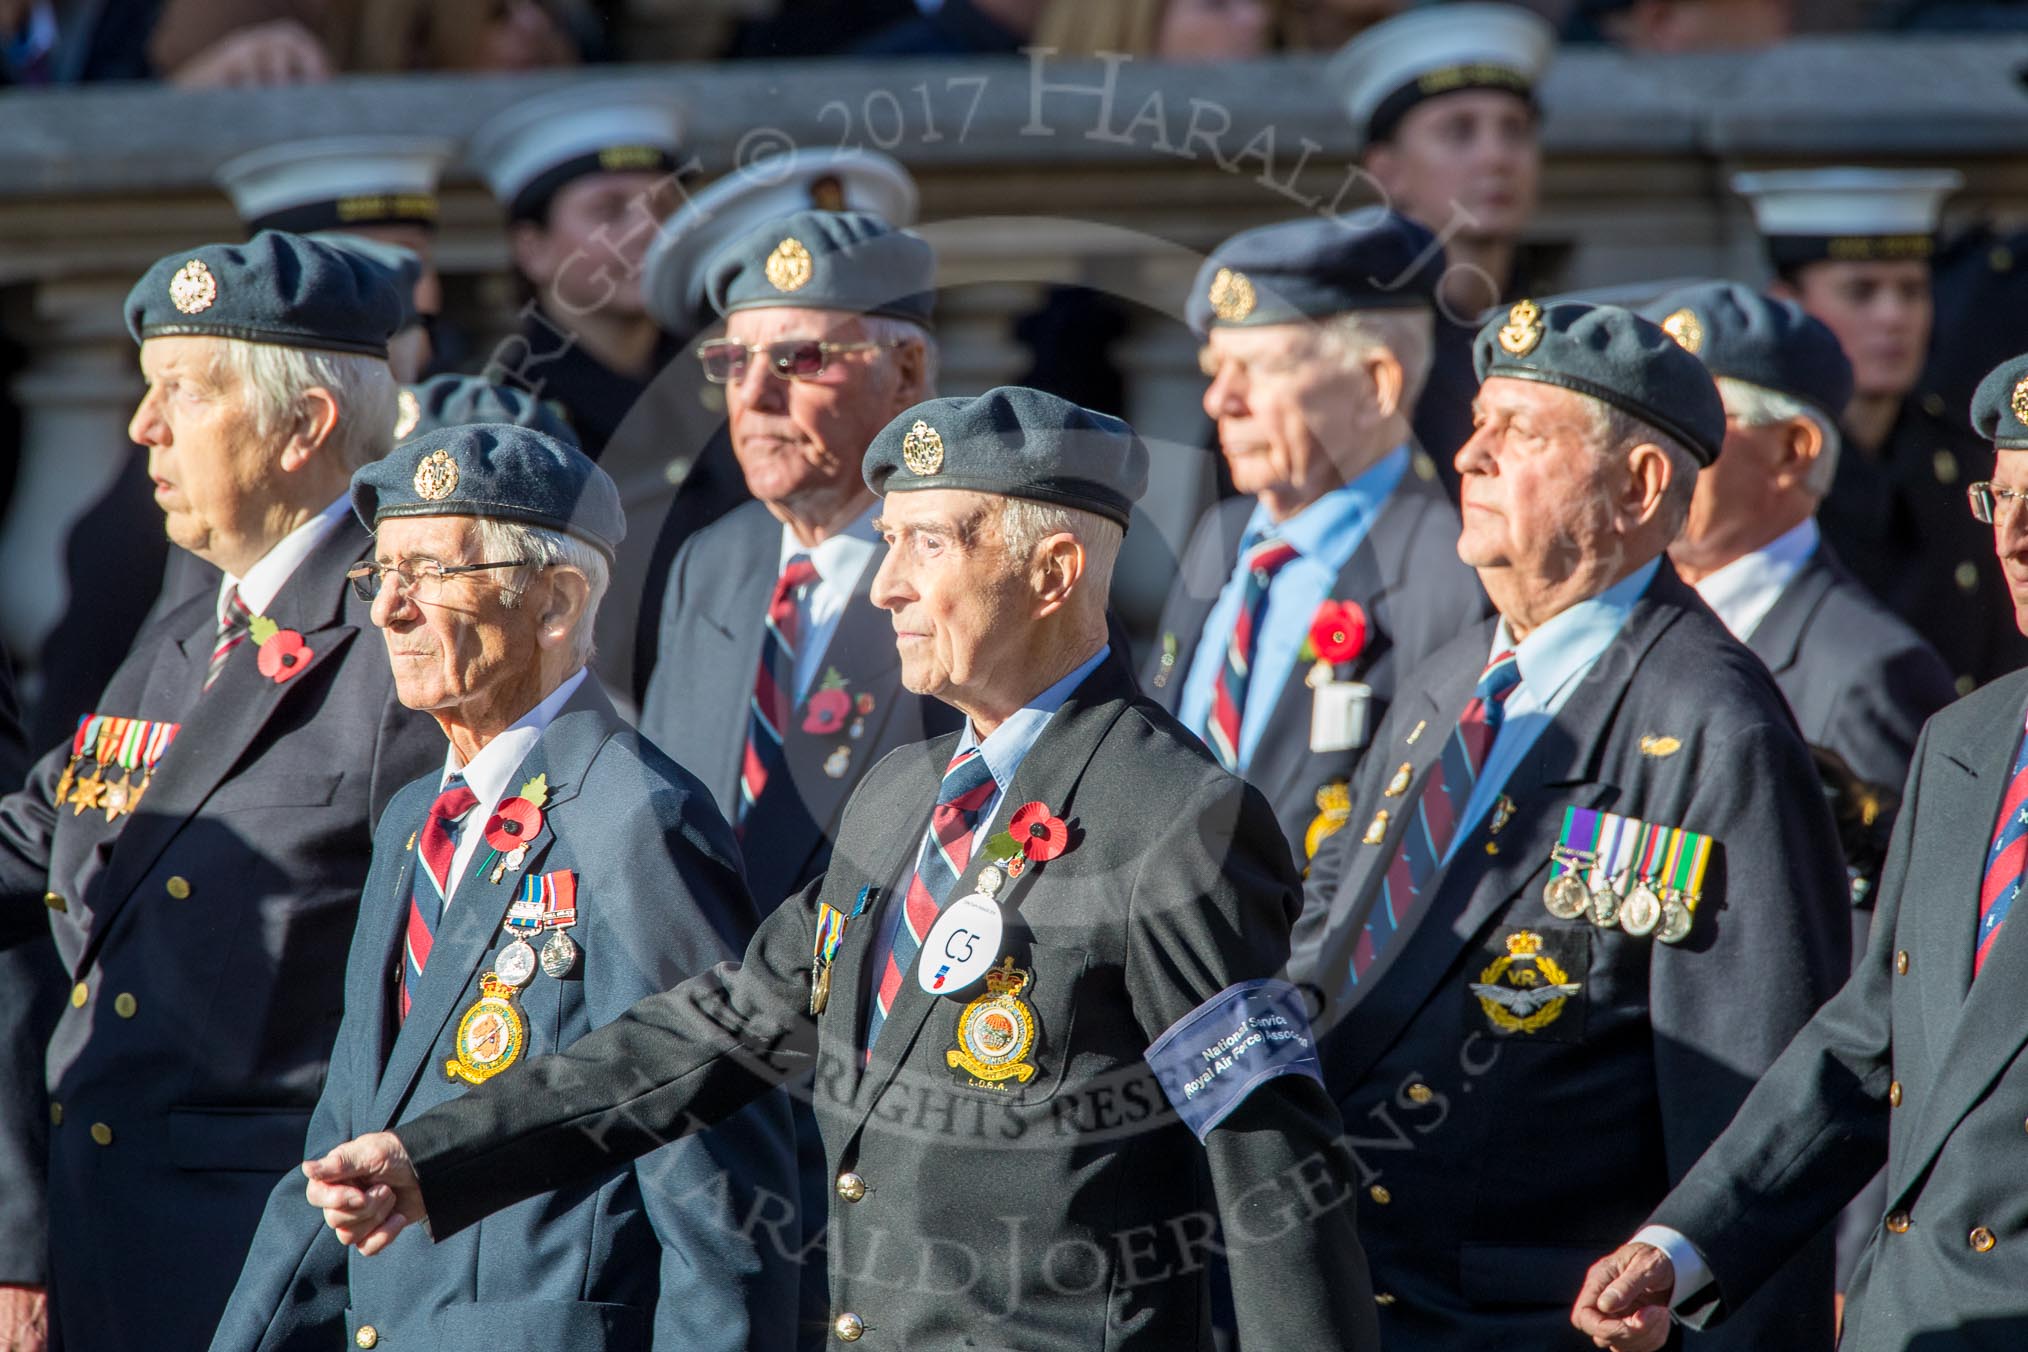 National Service(Royal Air Force)Association (NS(RAF)A) (Group C5, 39 members) during the Royal British Legion March Past on Remembrance Sunday at the Cenotaph, Whitehall, Westminster, London, 11 November 2018, 12:15